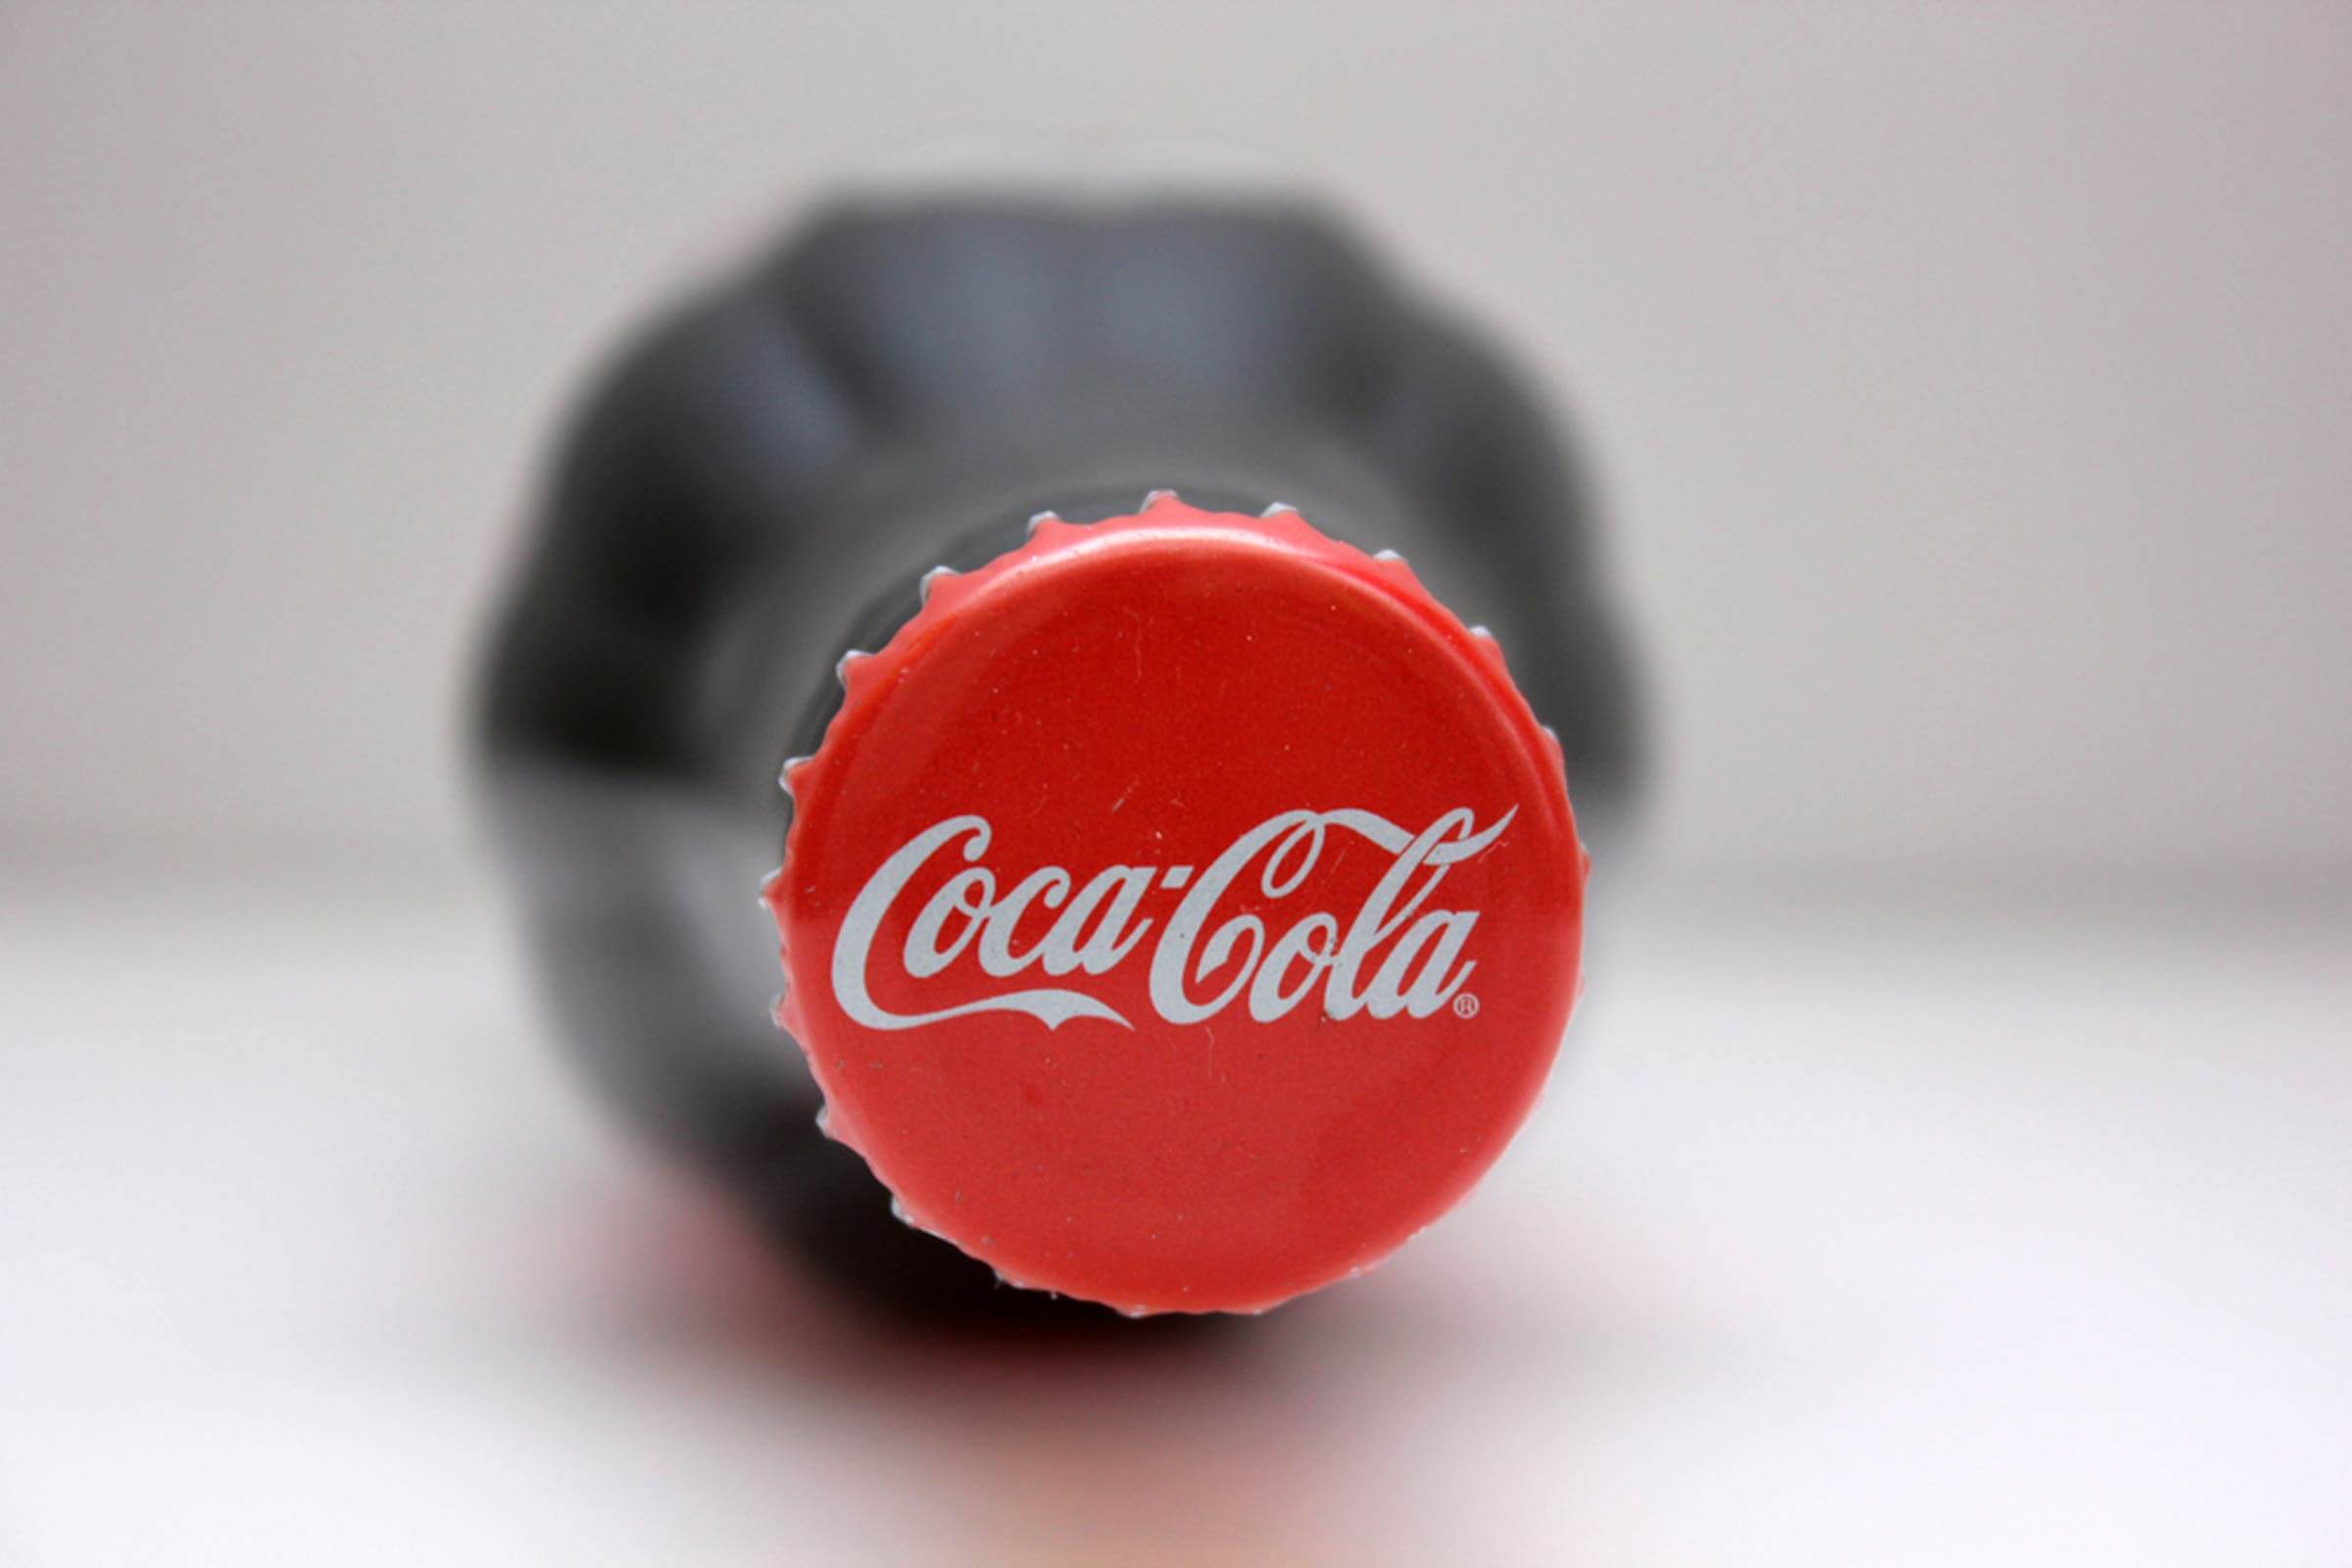 Coca-Cola Logo - The Real Reason the Coca-Cola Logo Is Red | Reader's Digest